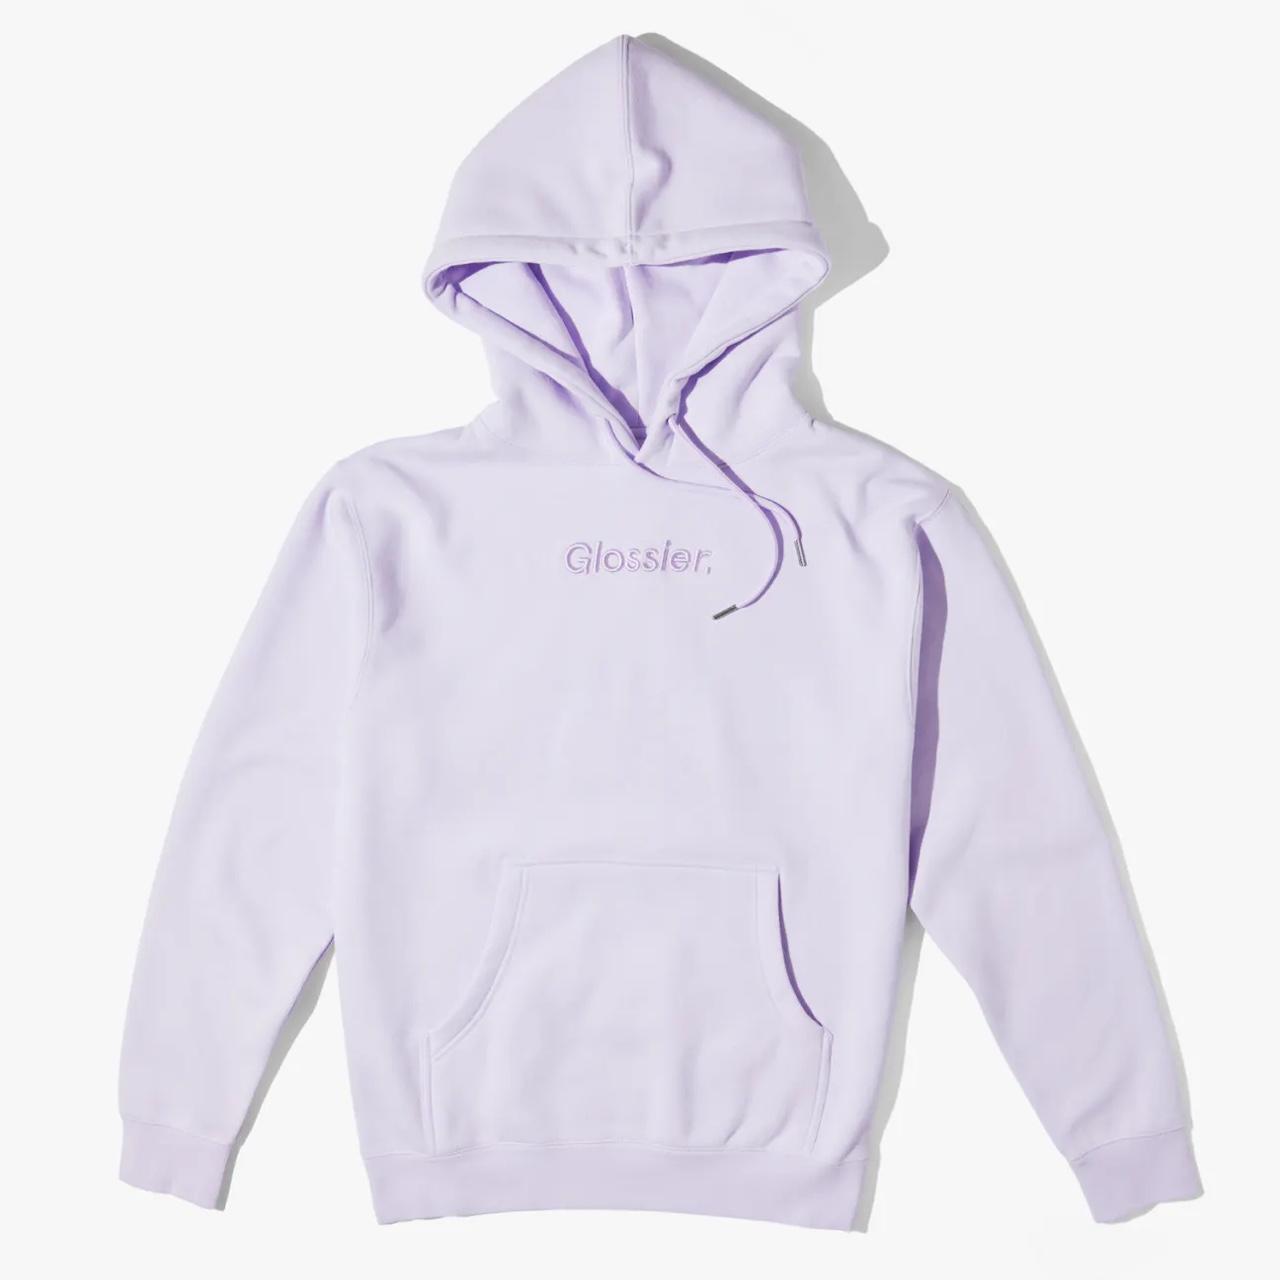 Glossier Embroidered Lavender Hoodie - size small -... - Depop